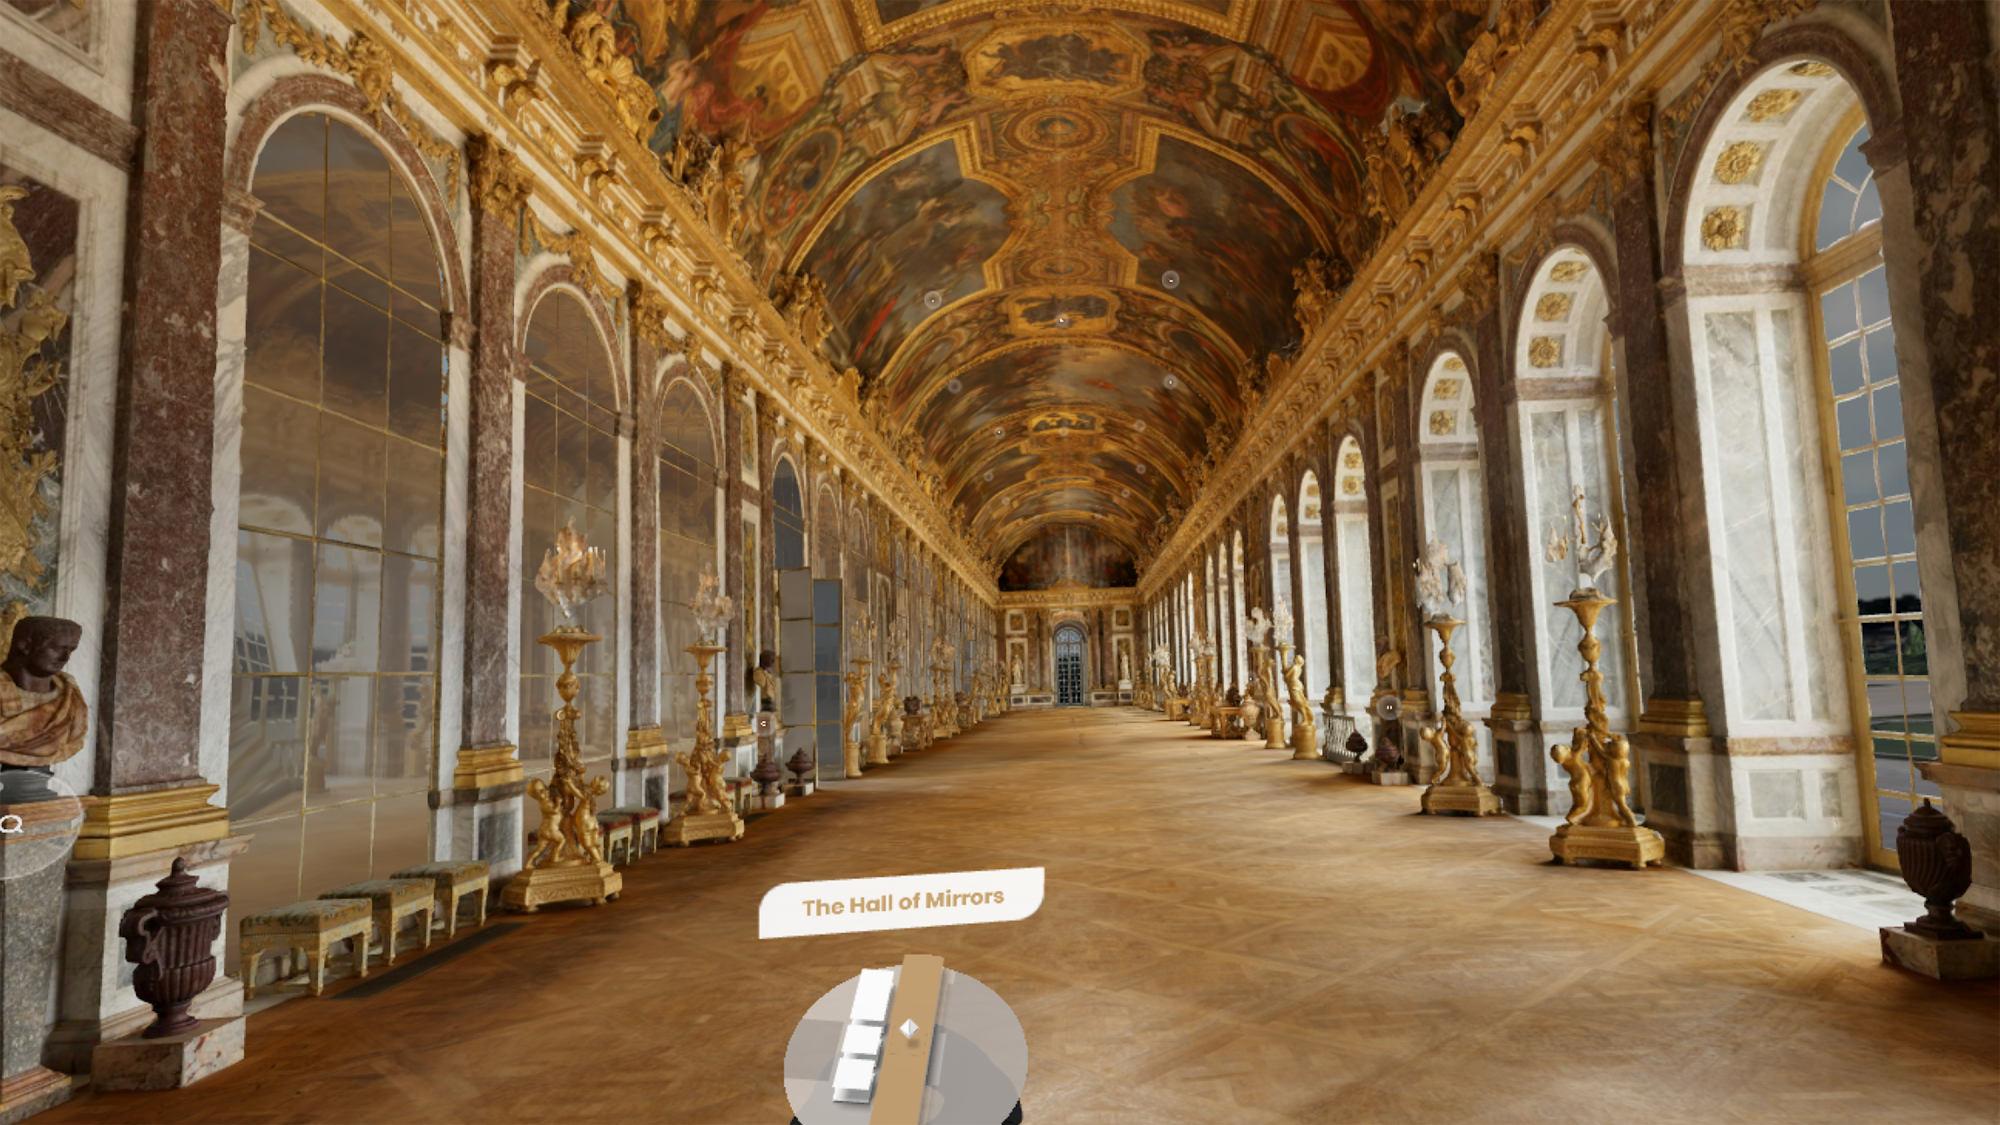 Make the Palace of Versailles yours on Google Arts & Culture